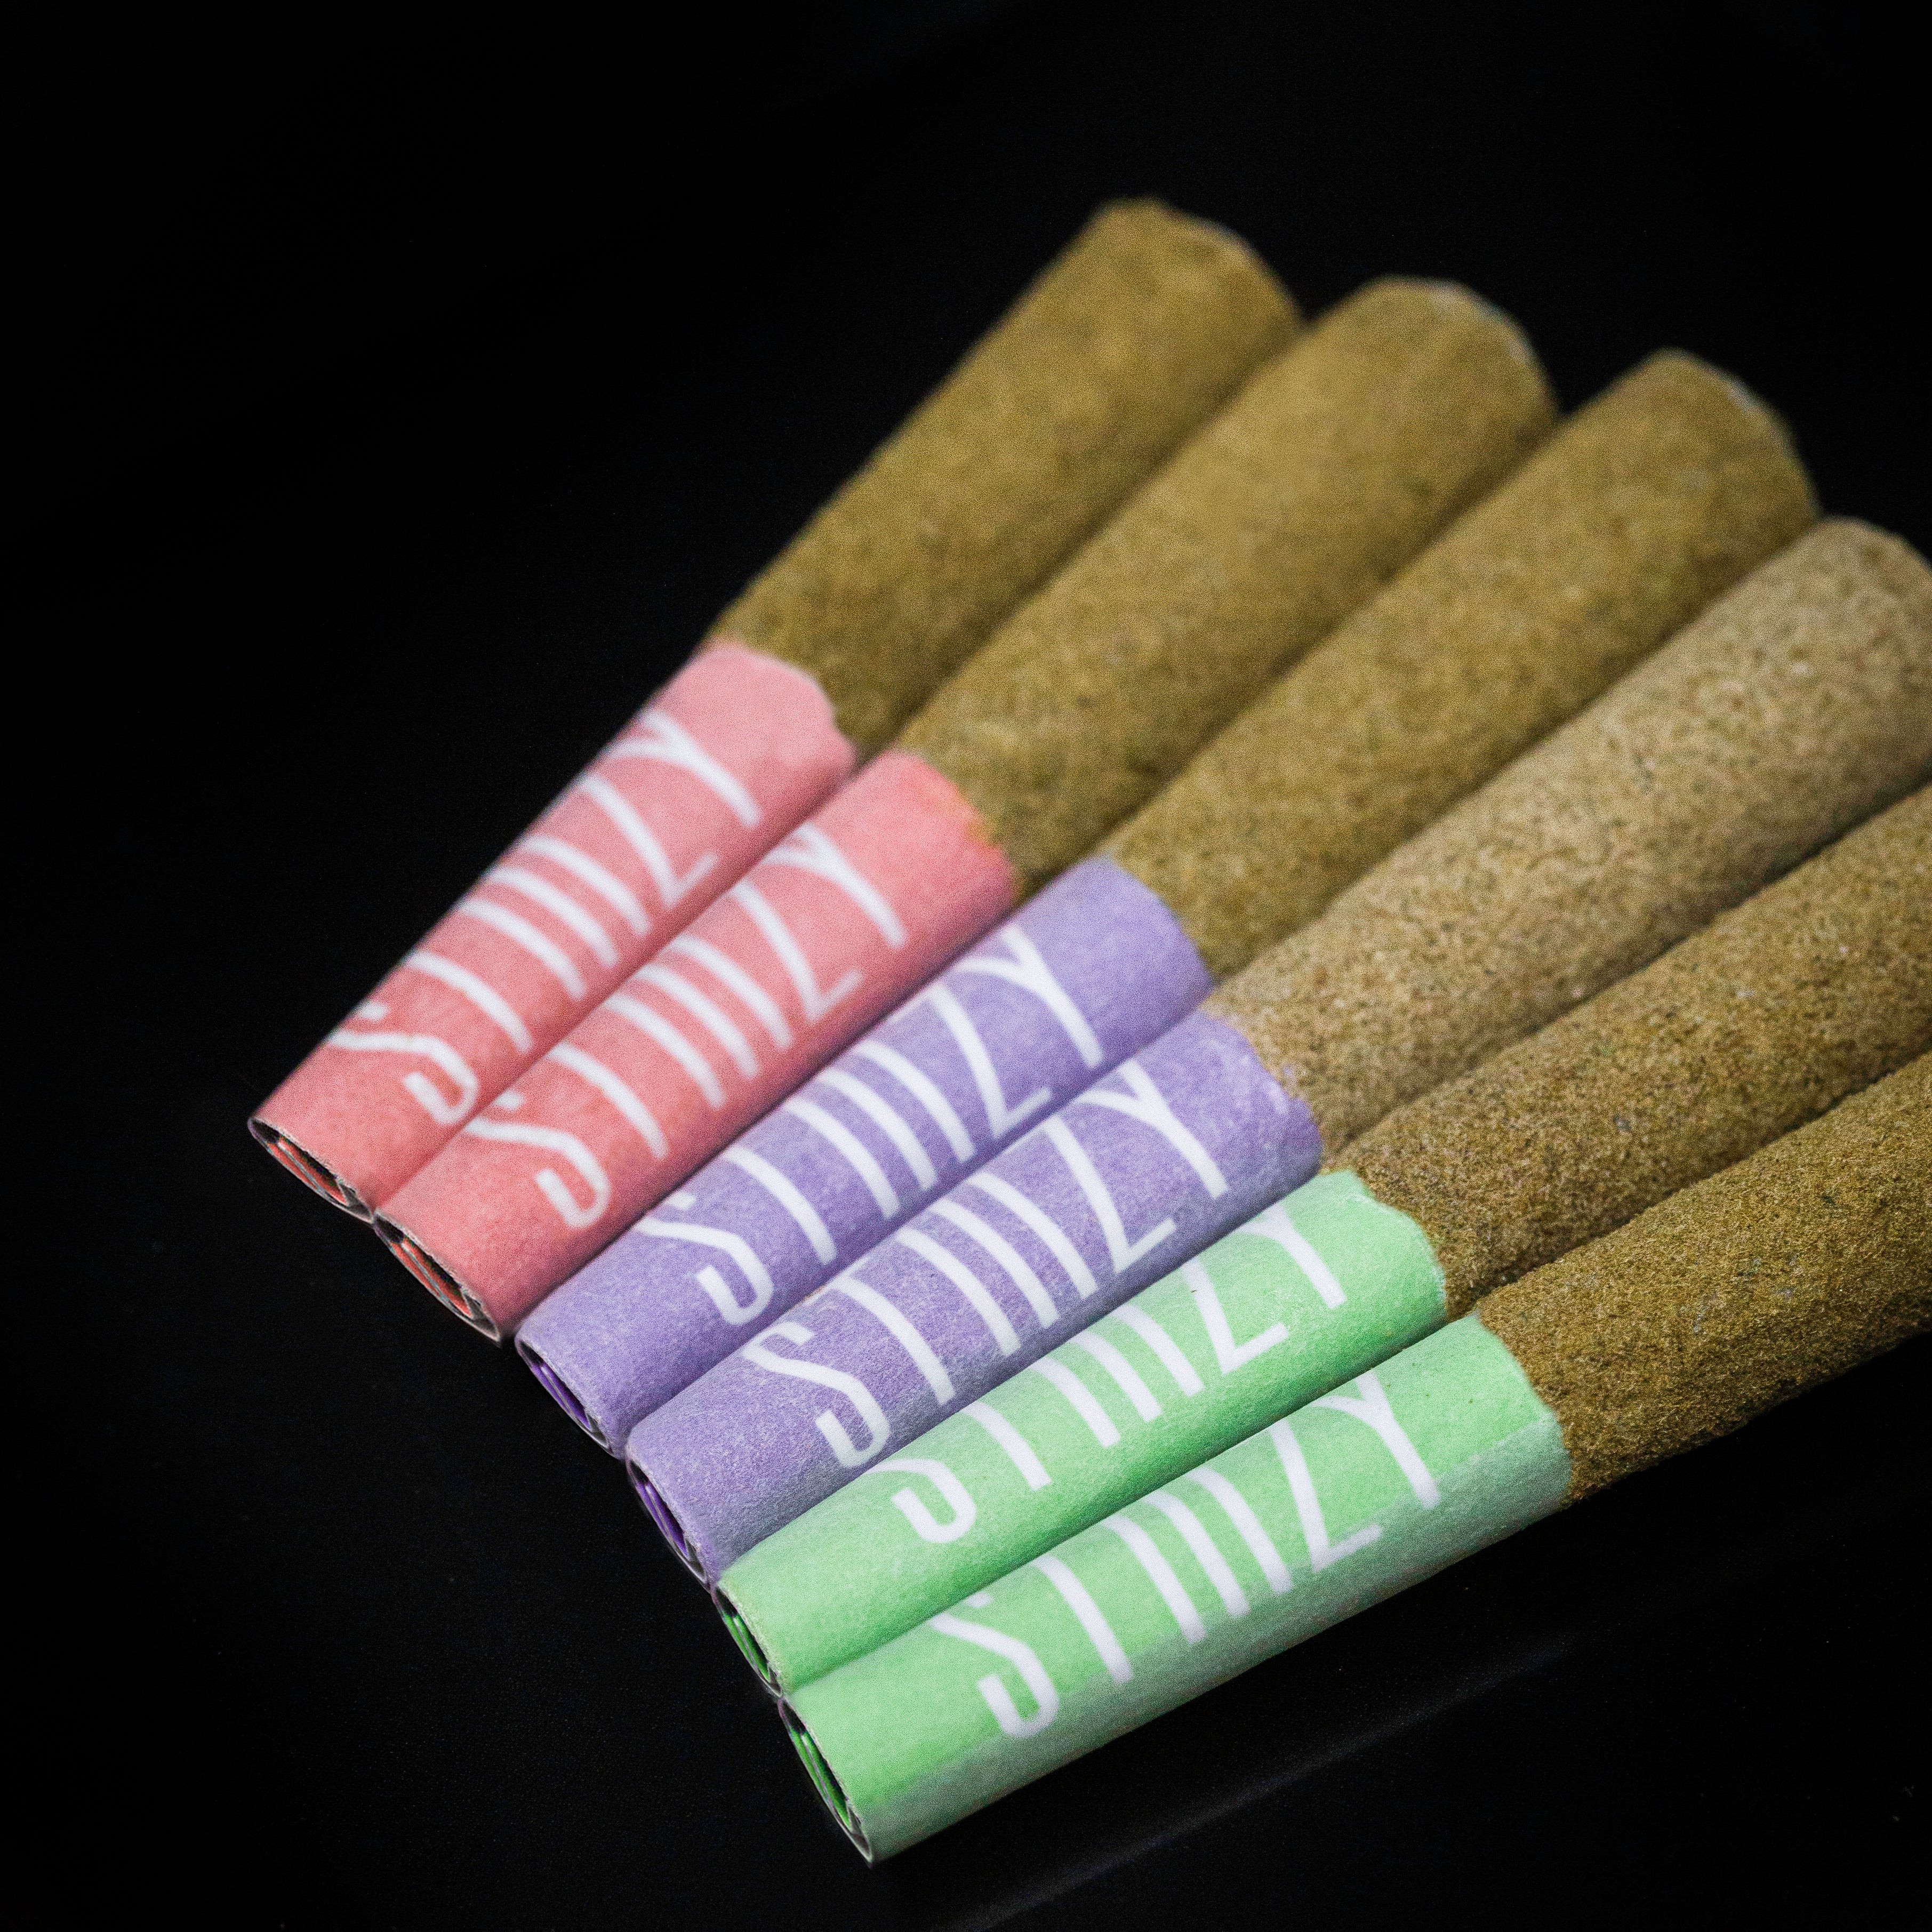 A group of pre-rolls infused with live rosin badder are laid out on a black surface.